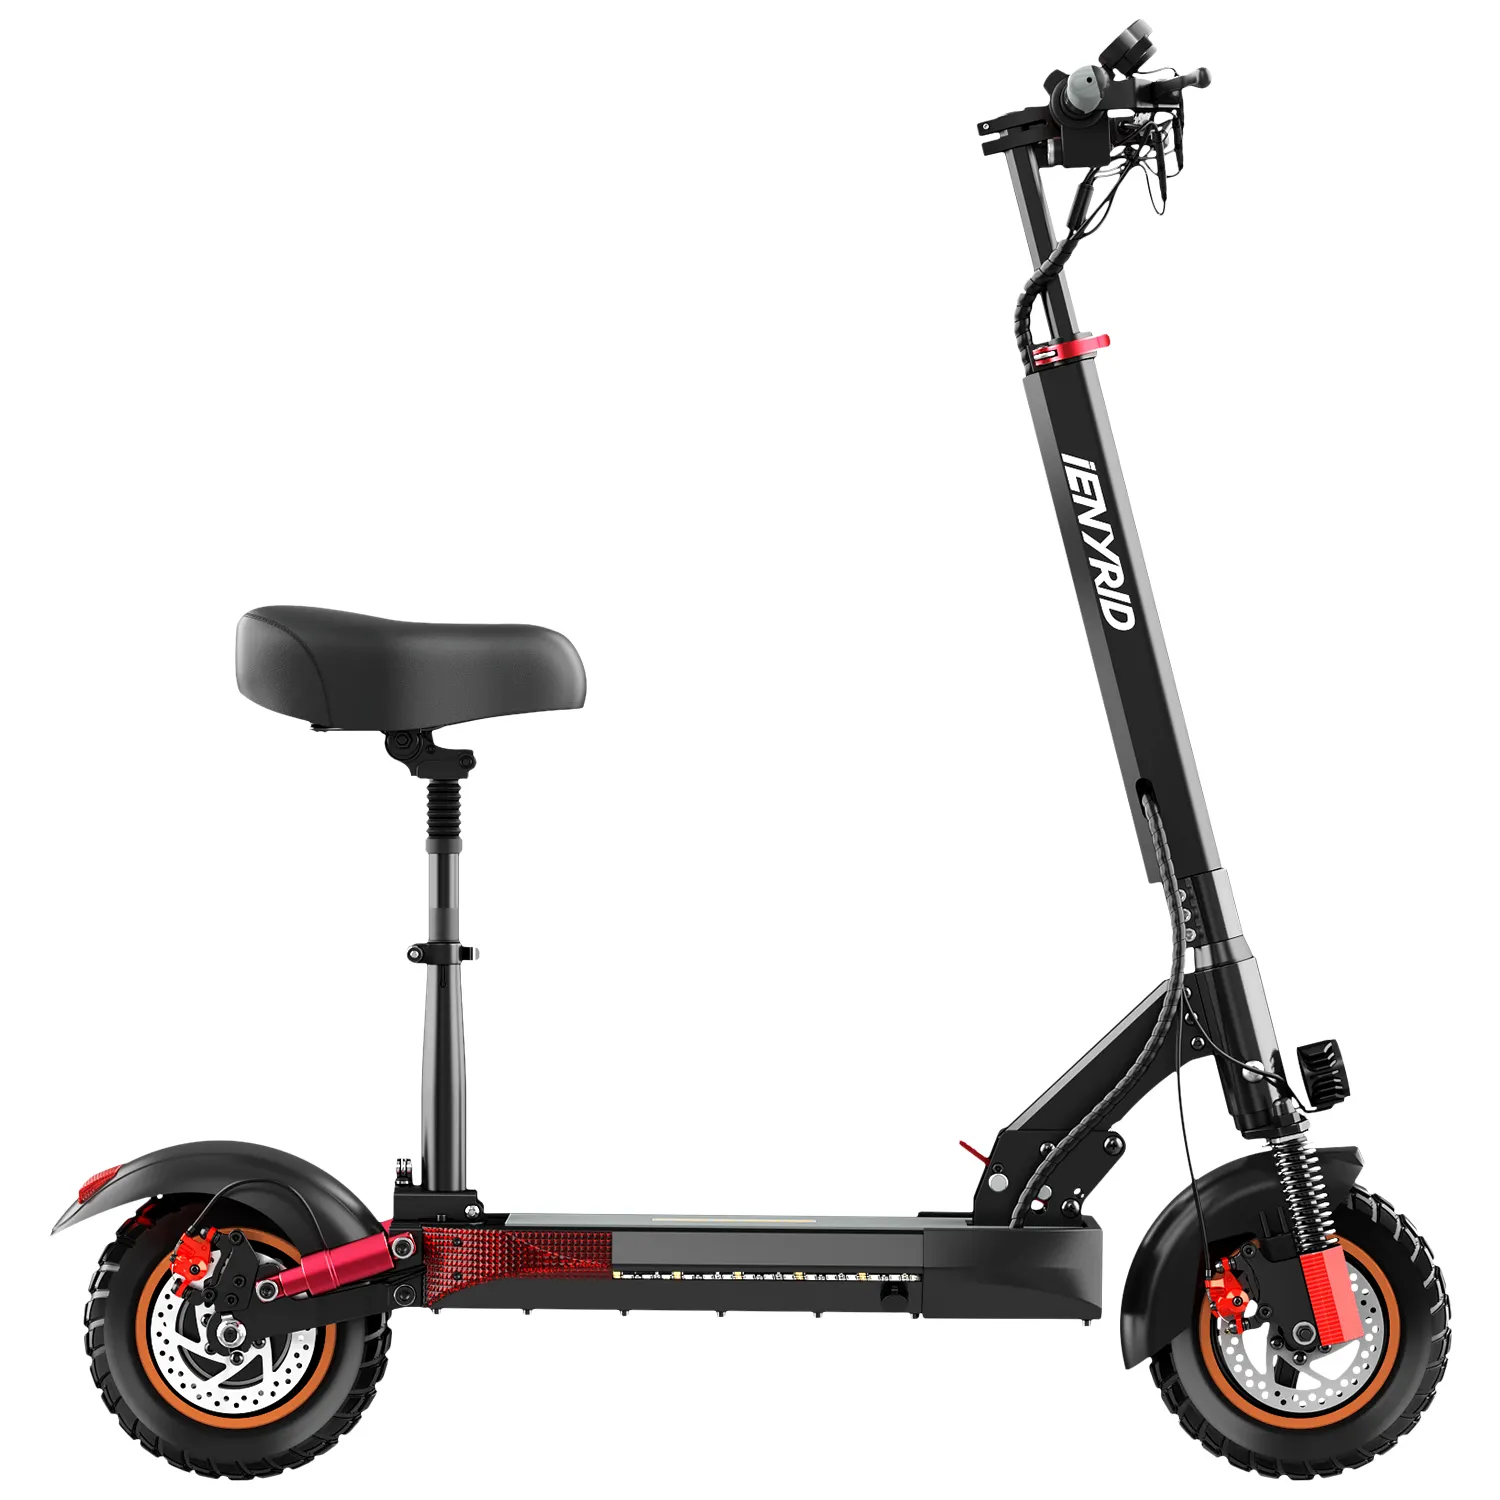 [Eu Stock]New Style Kugoo IENYRID M4 Pro S 10Ah 600W high speed 45km/h 2 wheel adult electric scooters for EU with seat scooters